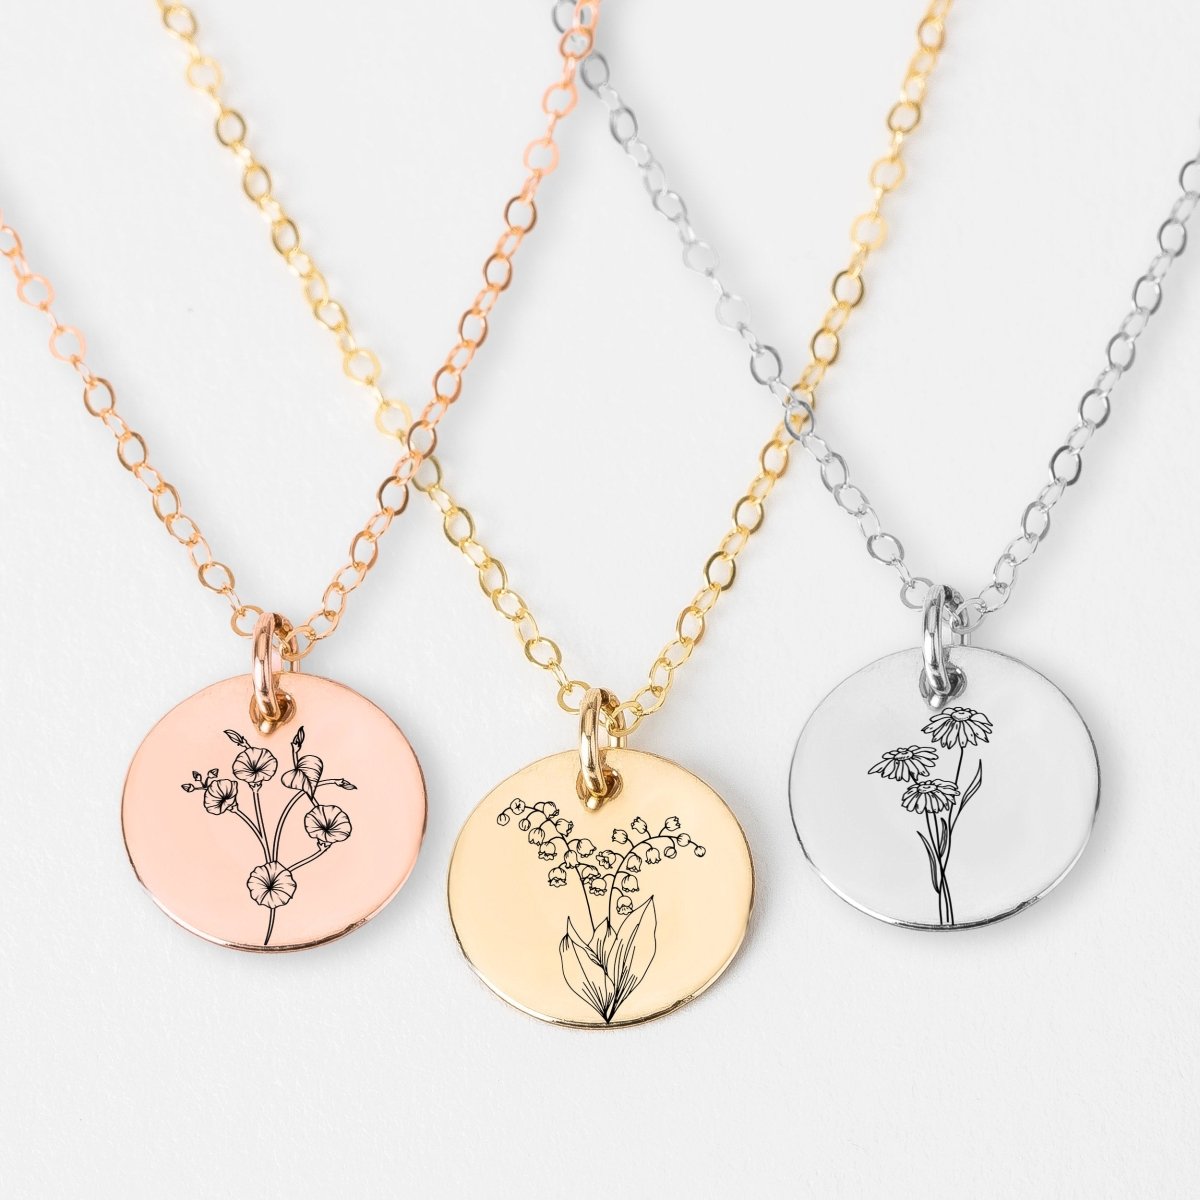 Birth Flower Disc Necklace - Melanie Golden Jewelry - _badge_new, birth month, bridal party, disc necklaces, engraved, flora, love, motherhood, necklace, new, pendant necklace, personalized, wedding